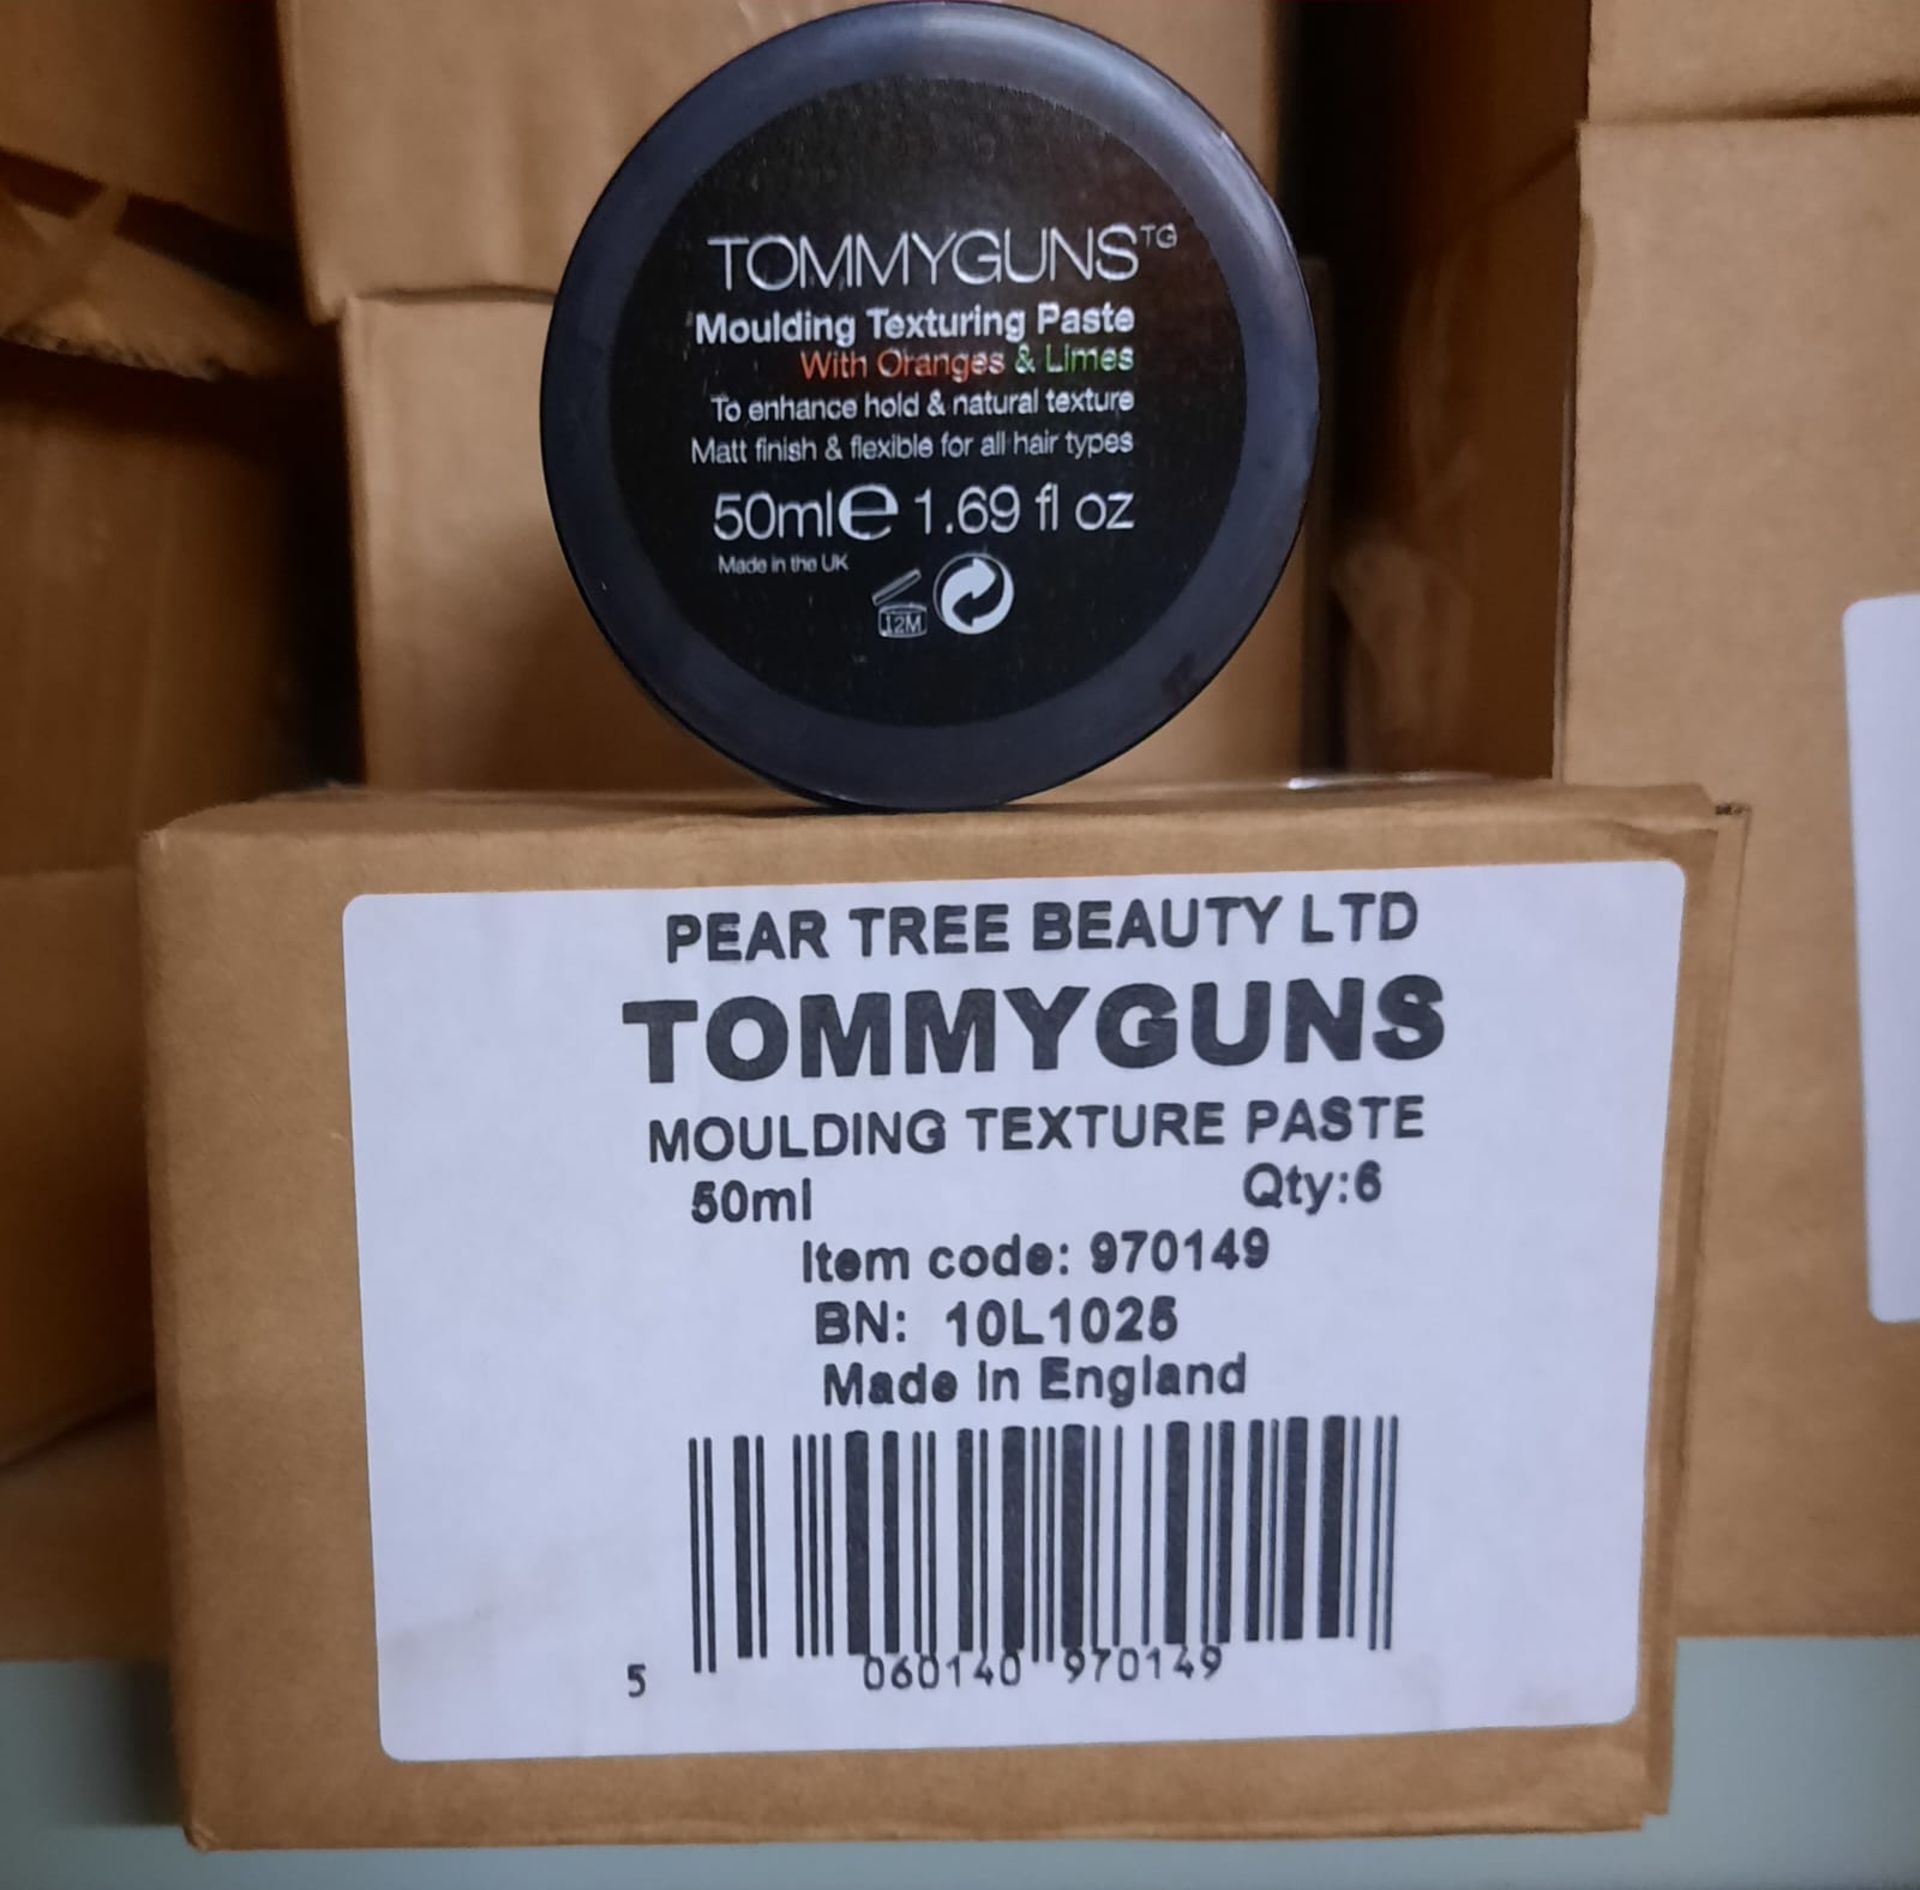 RRP £239.76 - X 4 BOXES OF 6 TOMMYGUNS MOULDING TEXTURING PASTE WITH ORANGE & LIME TO ENHANCE HOLD